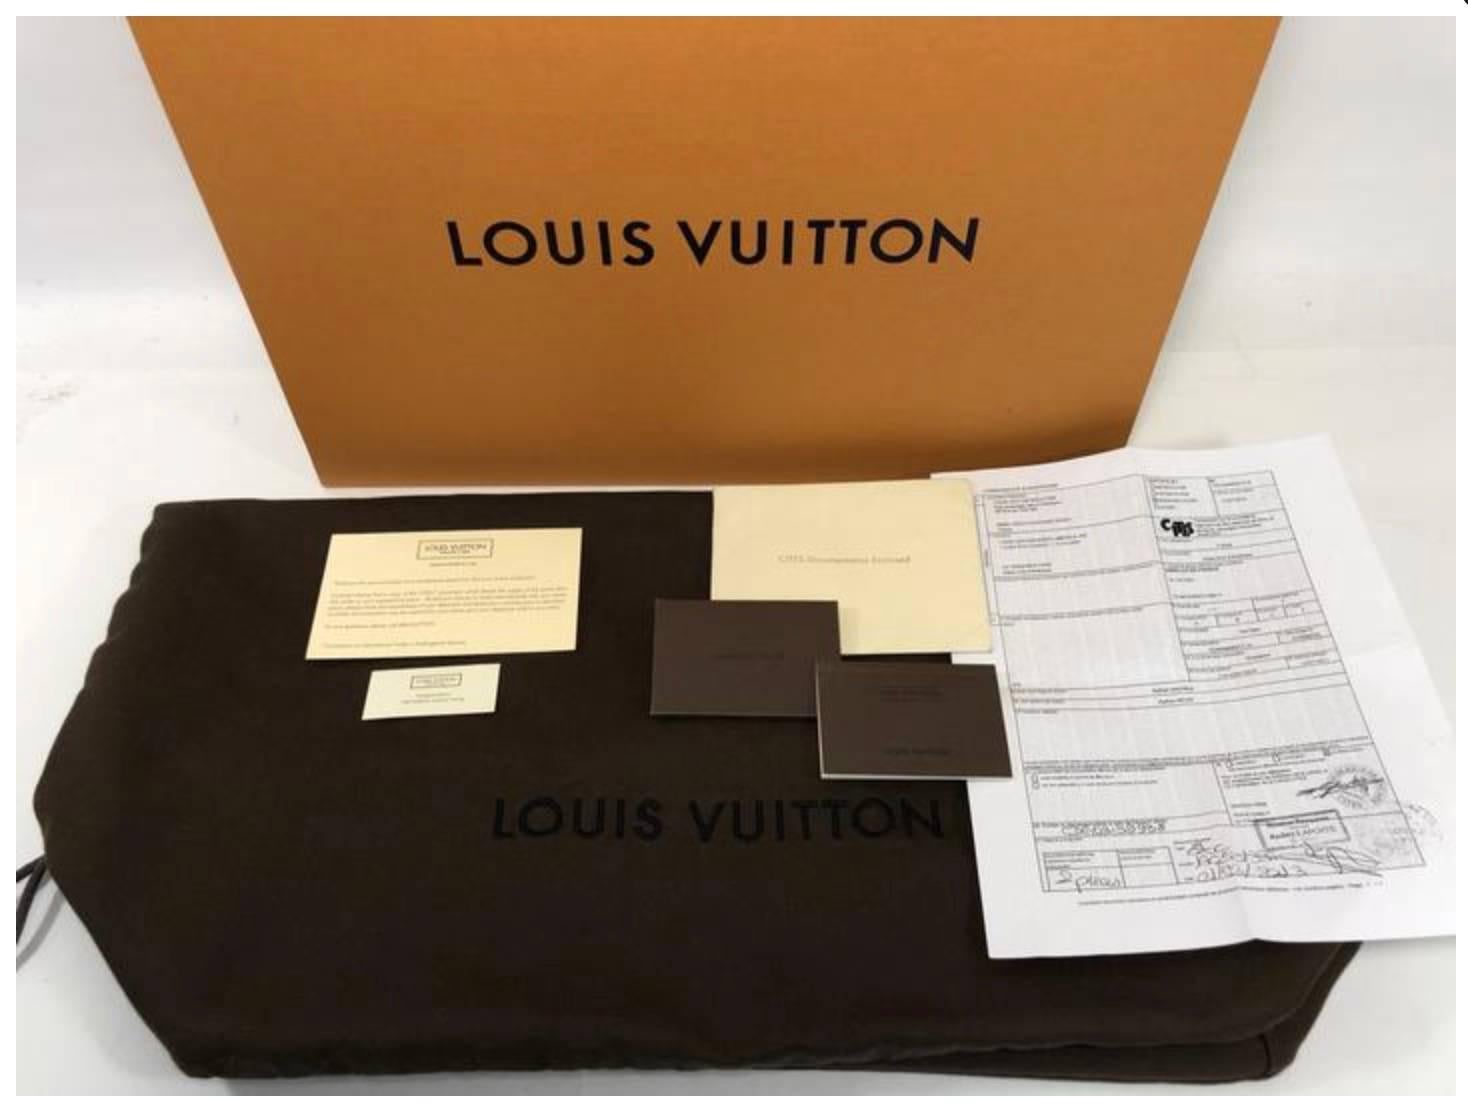 MODEL - Louis Vuitton Limited Edition Python Artsy in Infini

CONDITION - Looks New!  Rare! 

SKU - 2210

ORIGINAL RETAIL PRICE - 11500 + tax

DATE/SERIAL CODE - AS5102

ORIGIN - France

PRODUCTION - 2012

DIMENSIONS - L16.5 x H12.6 x